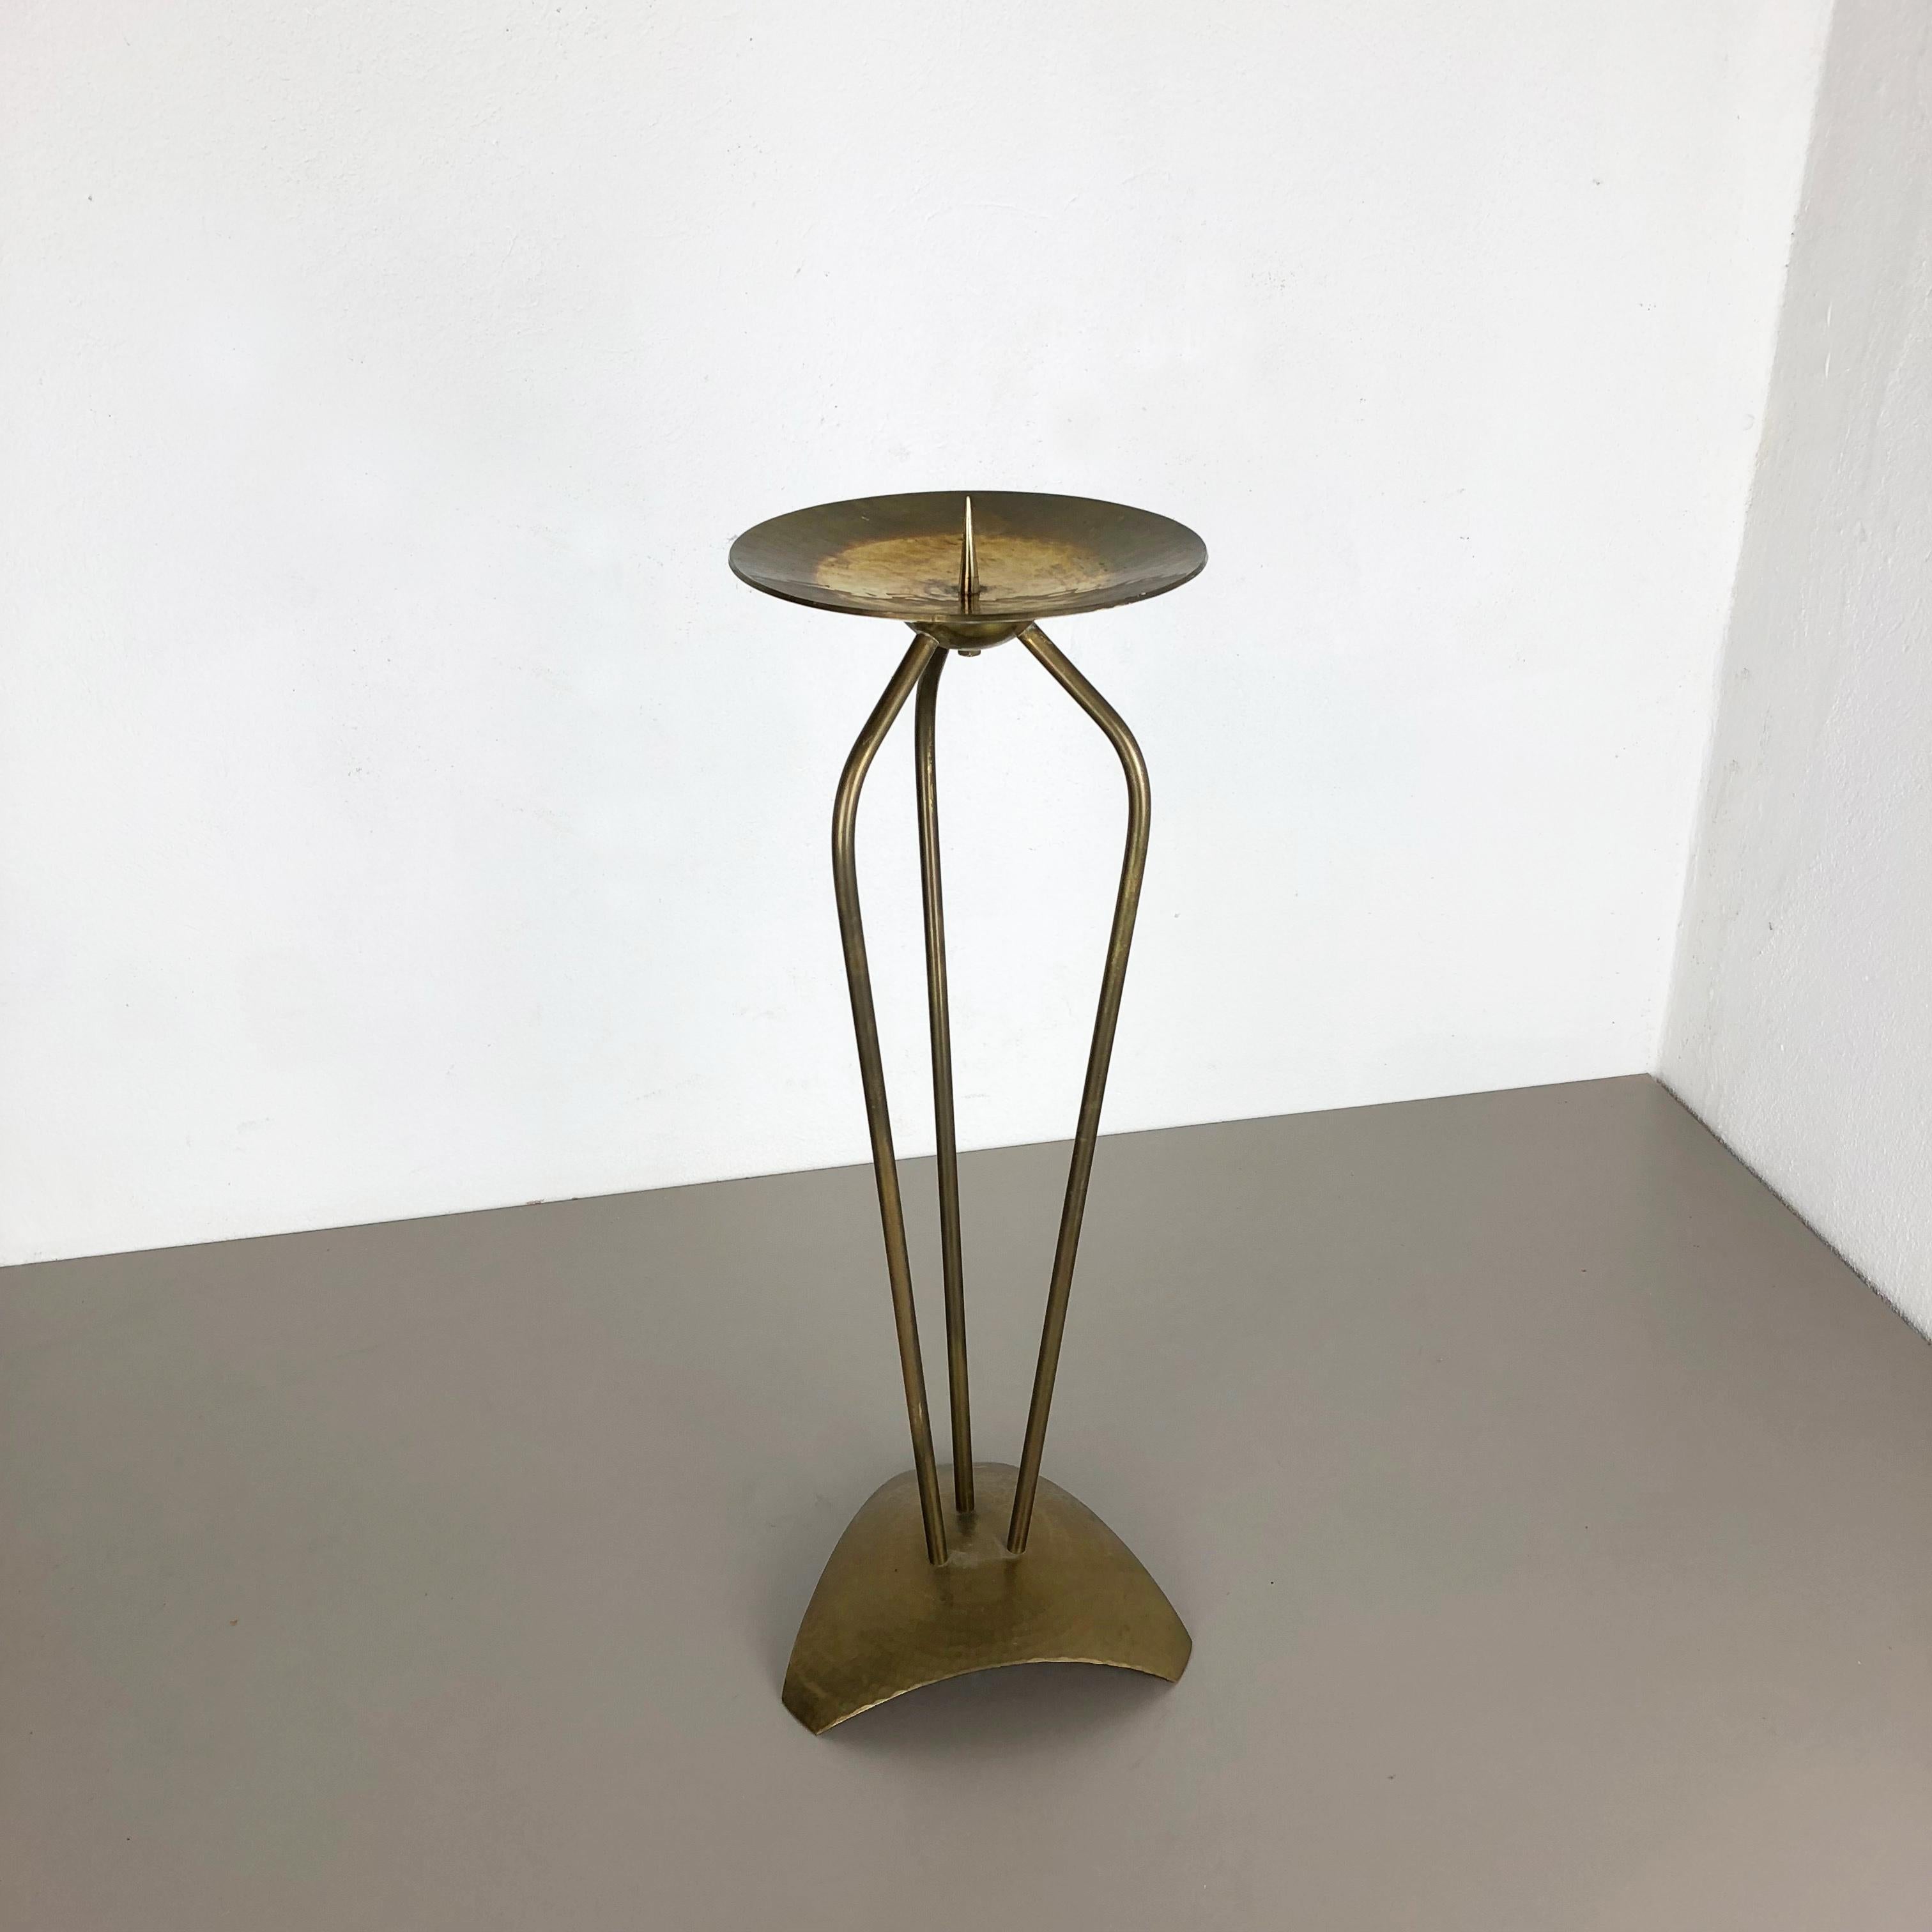 Article:

Sculptural floor candleholder


Origin:

Germany


Material:

Solid brass


Decade:

1950s




This original super large vintage candleholder, was produced in the 1950s in Germany. It is made of solid brass, and has a